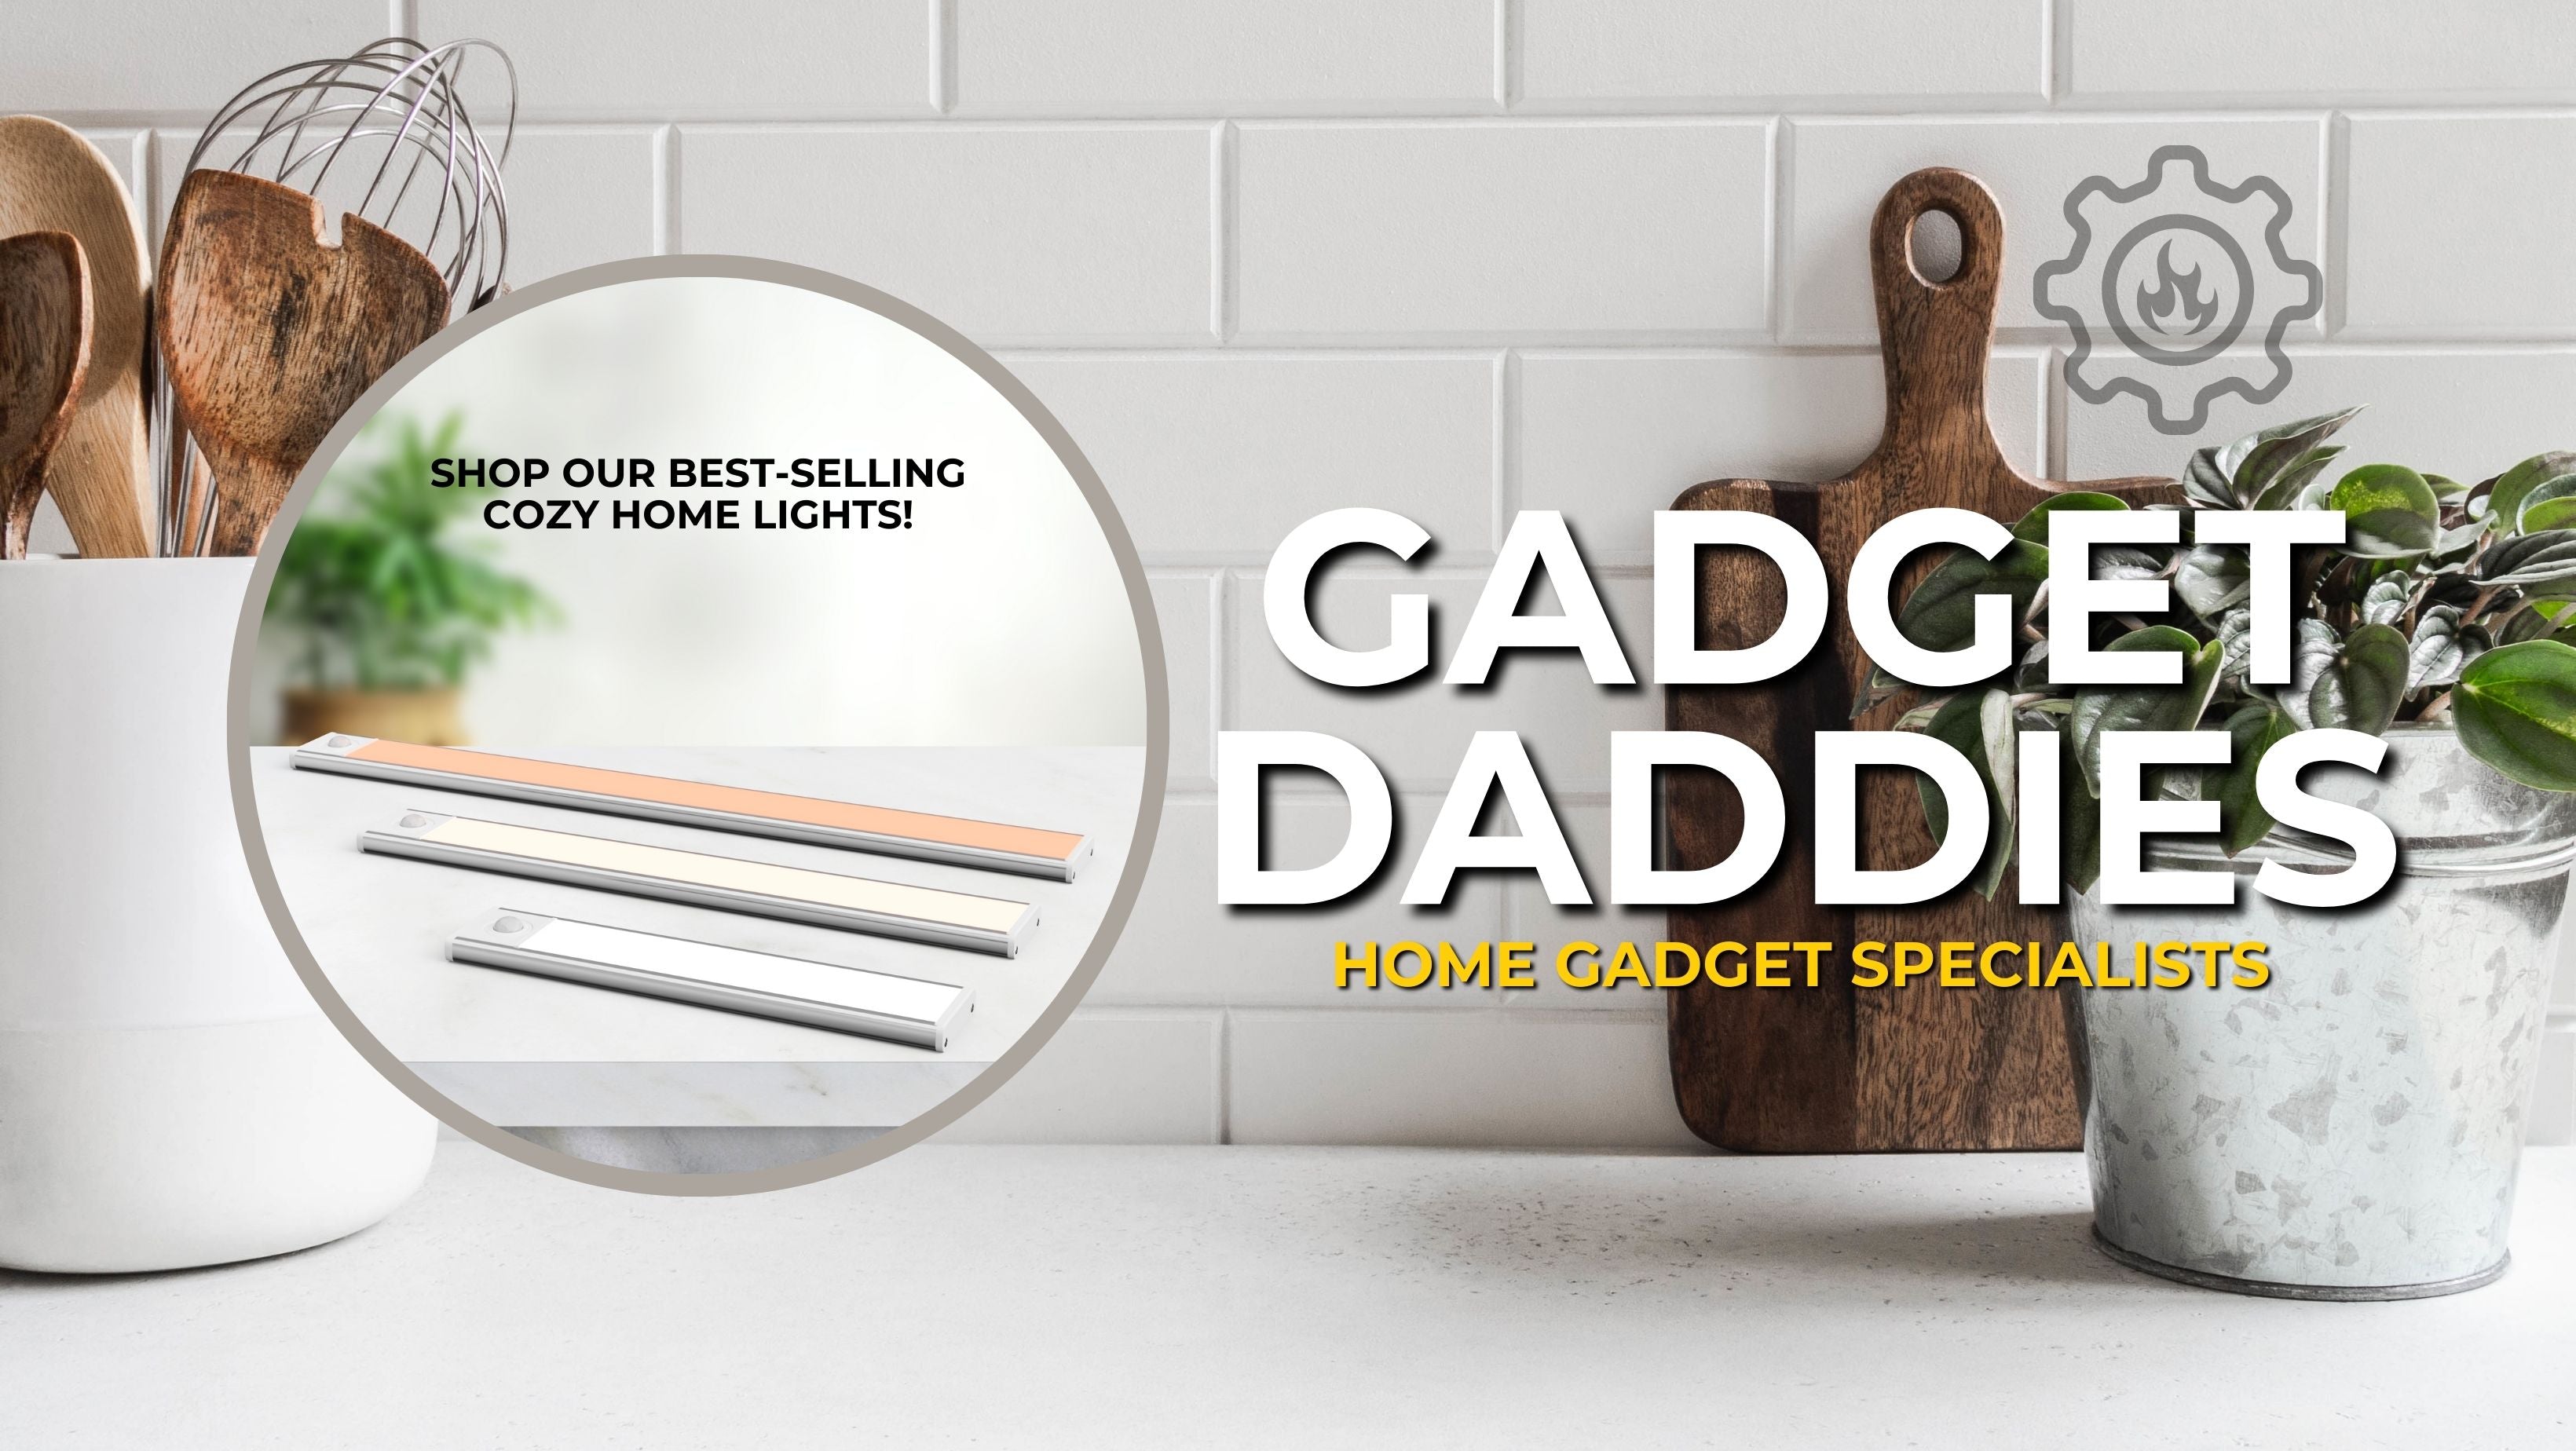 Gadget Daddies Homepage Banner Shop our best-selling Cozy Home Lights